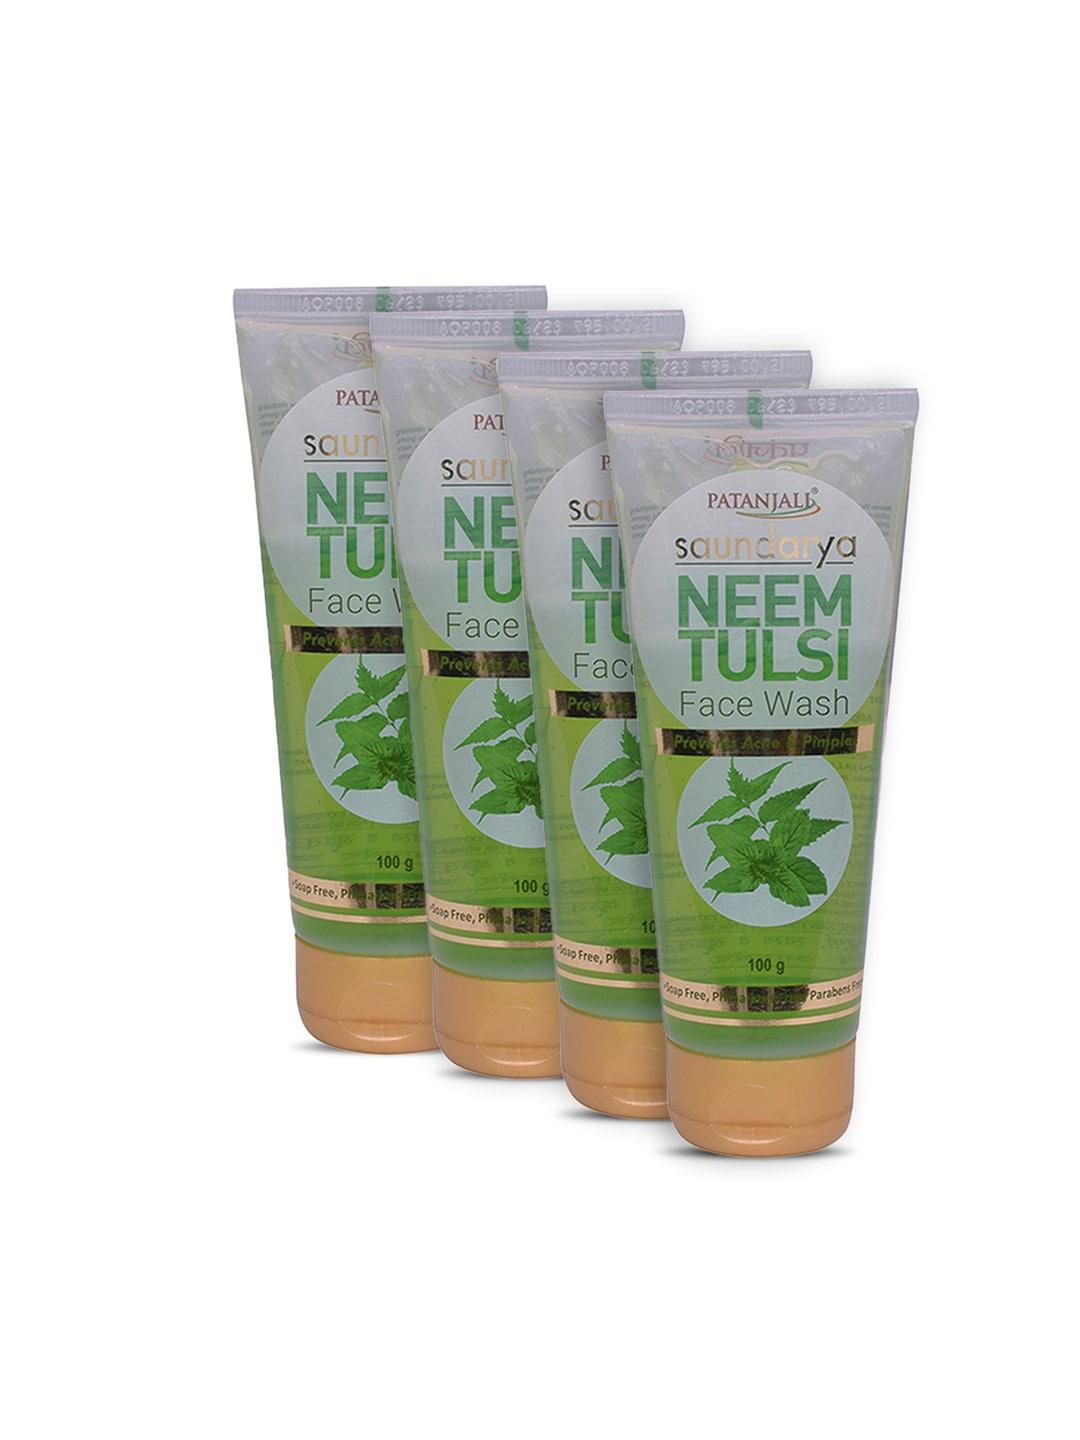 patanjali set of 4 saundarya neem tulsi face wash to prevent acne & pimple - 100 g each